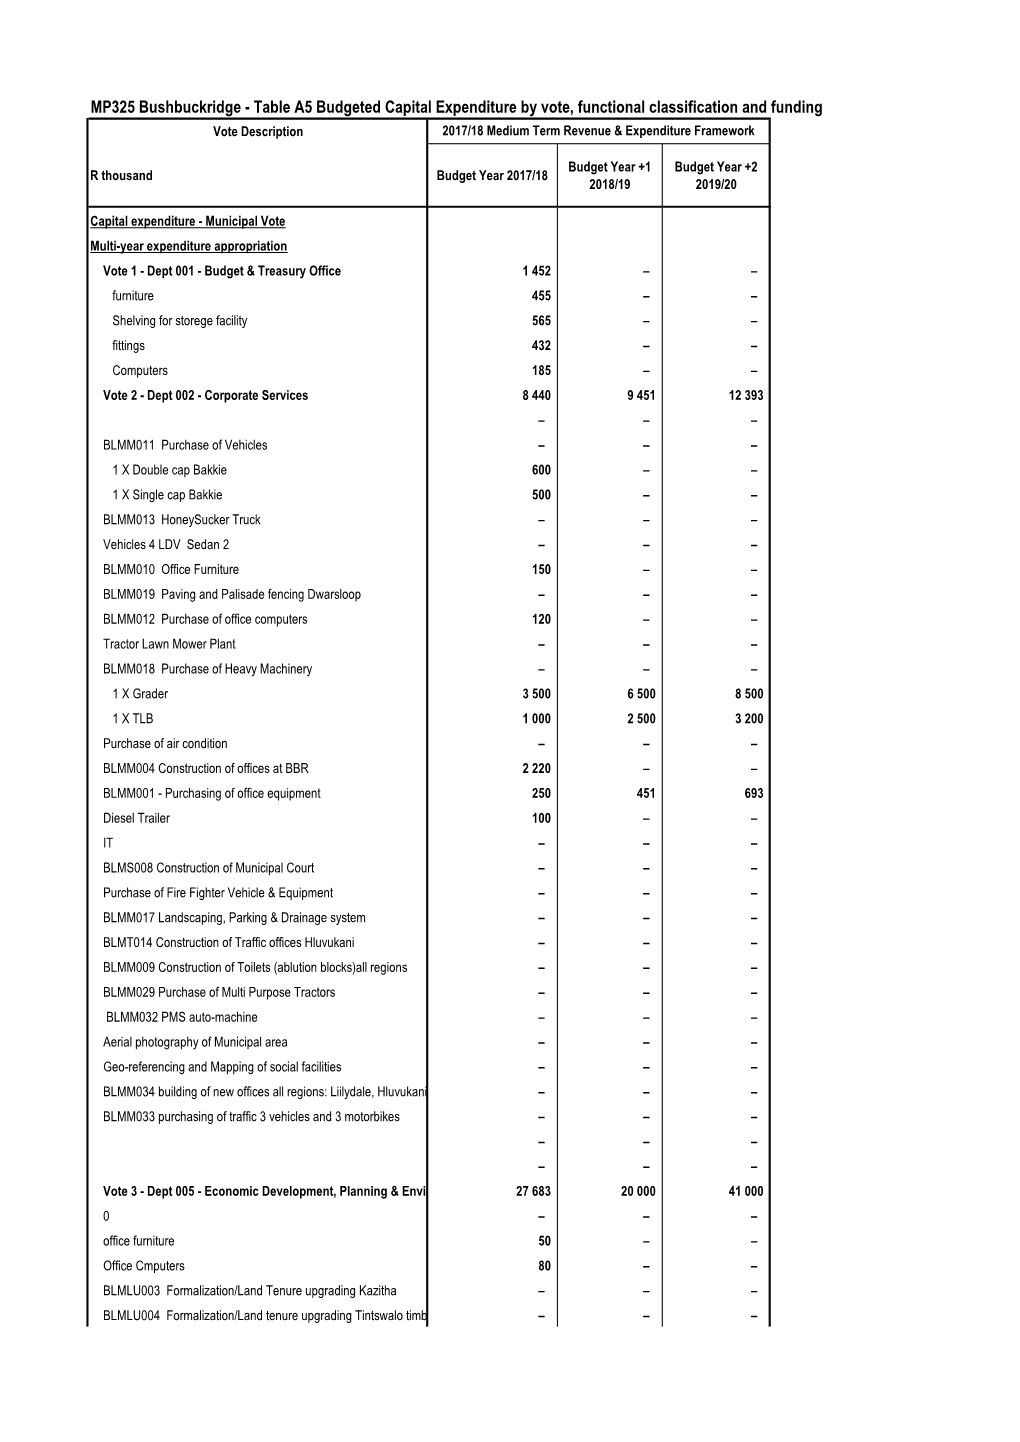 Table A5 Budgeted Capital Expenditure by Vote, Functional Classification and Funding Vote Description 2017/18 Medium Term Revenue & Expenditure Framework